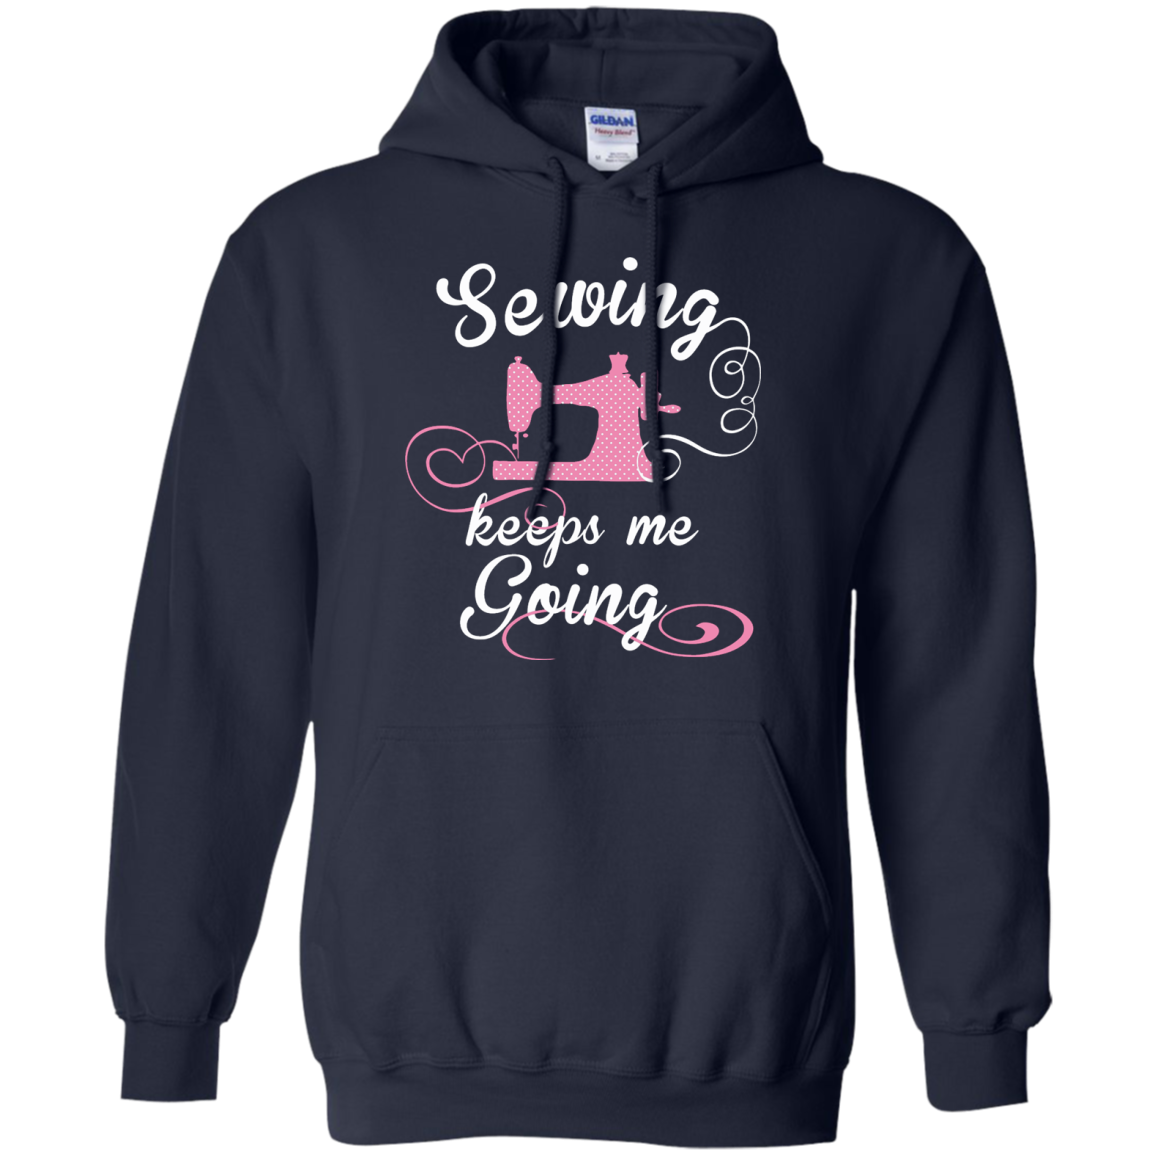 Sewing Keeps Me Going Pullover Hoodies - Crafter4Life - 3